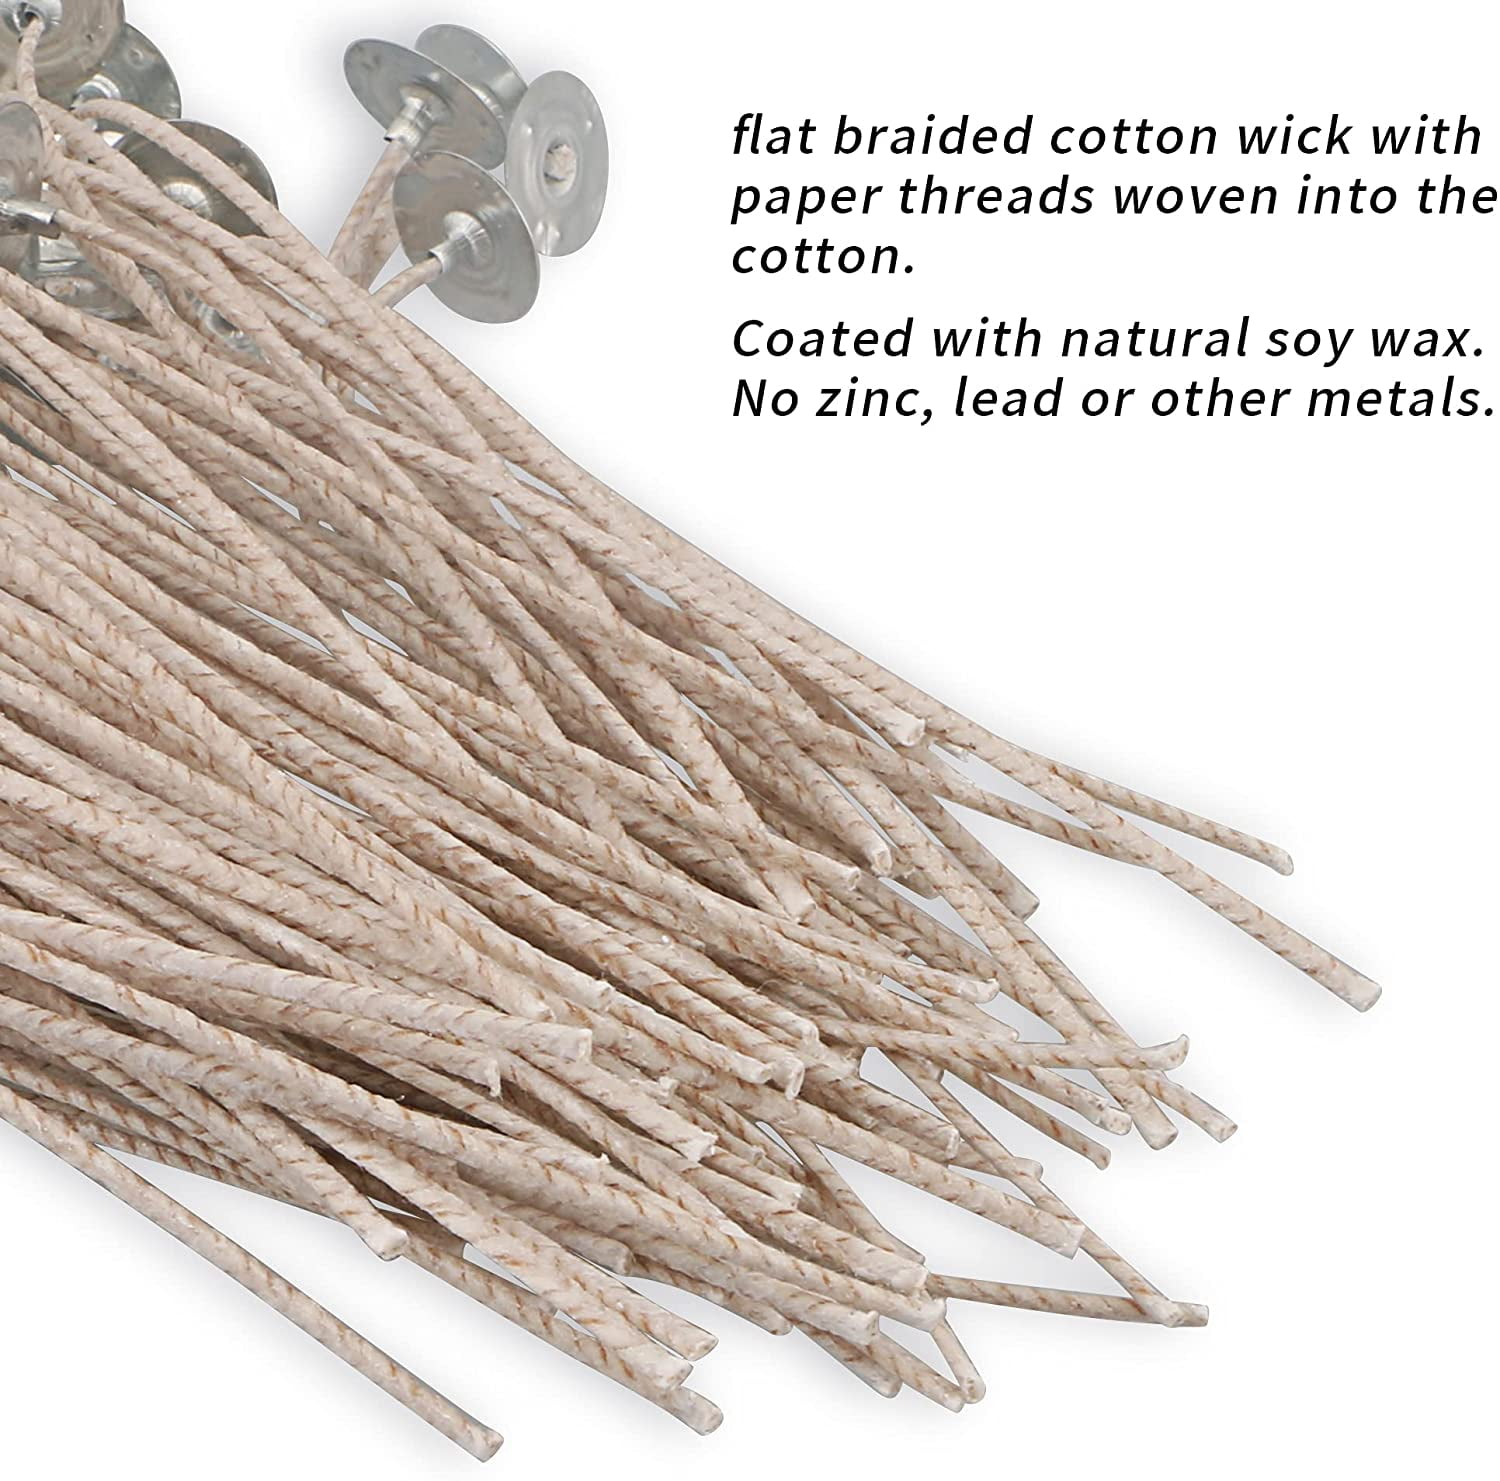 DGQ 6-inch Natural Candle Wicks With Tabs 100pcs 100 Cotton for sale online